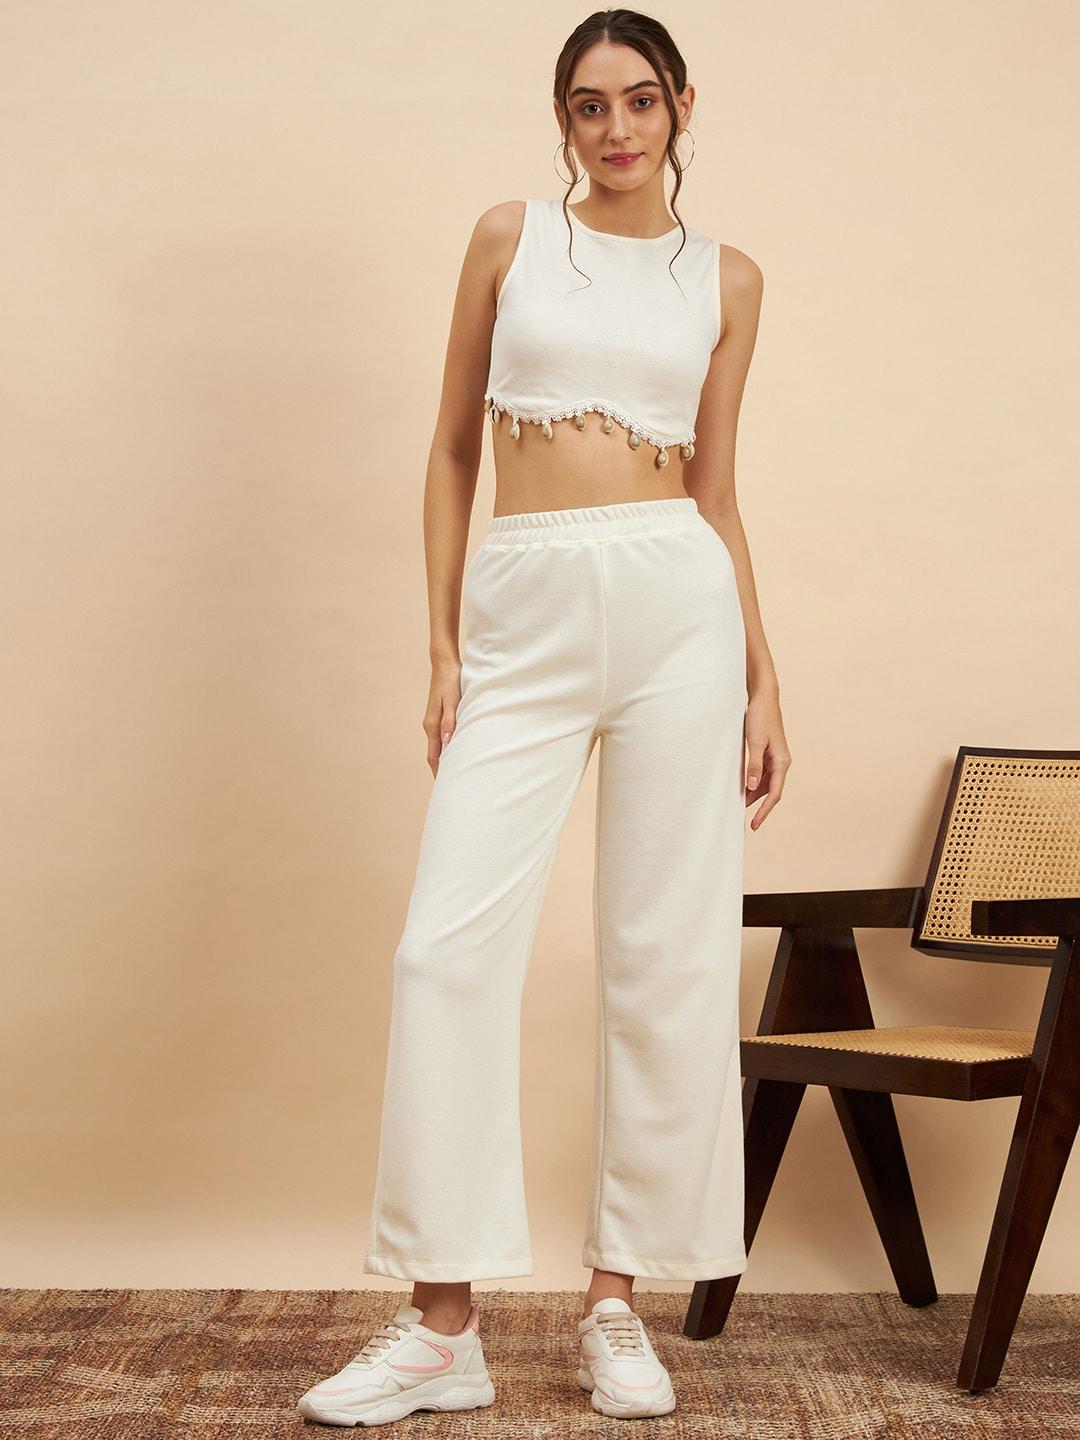 kassually sleeveless embellished detail top with trouser co-ords